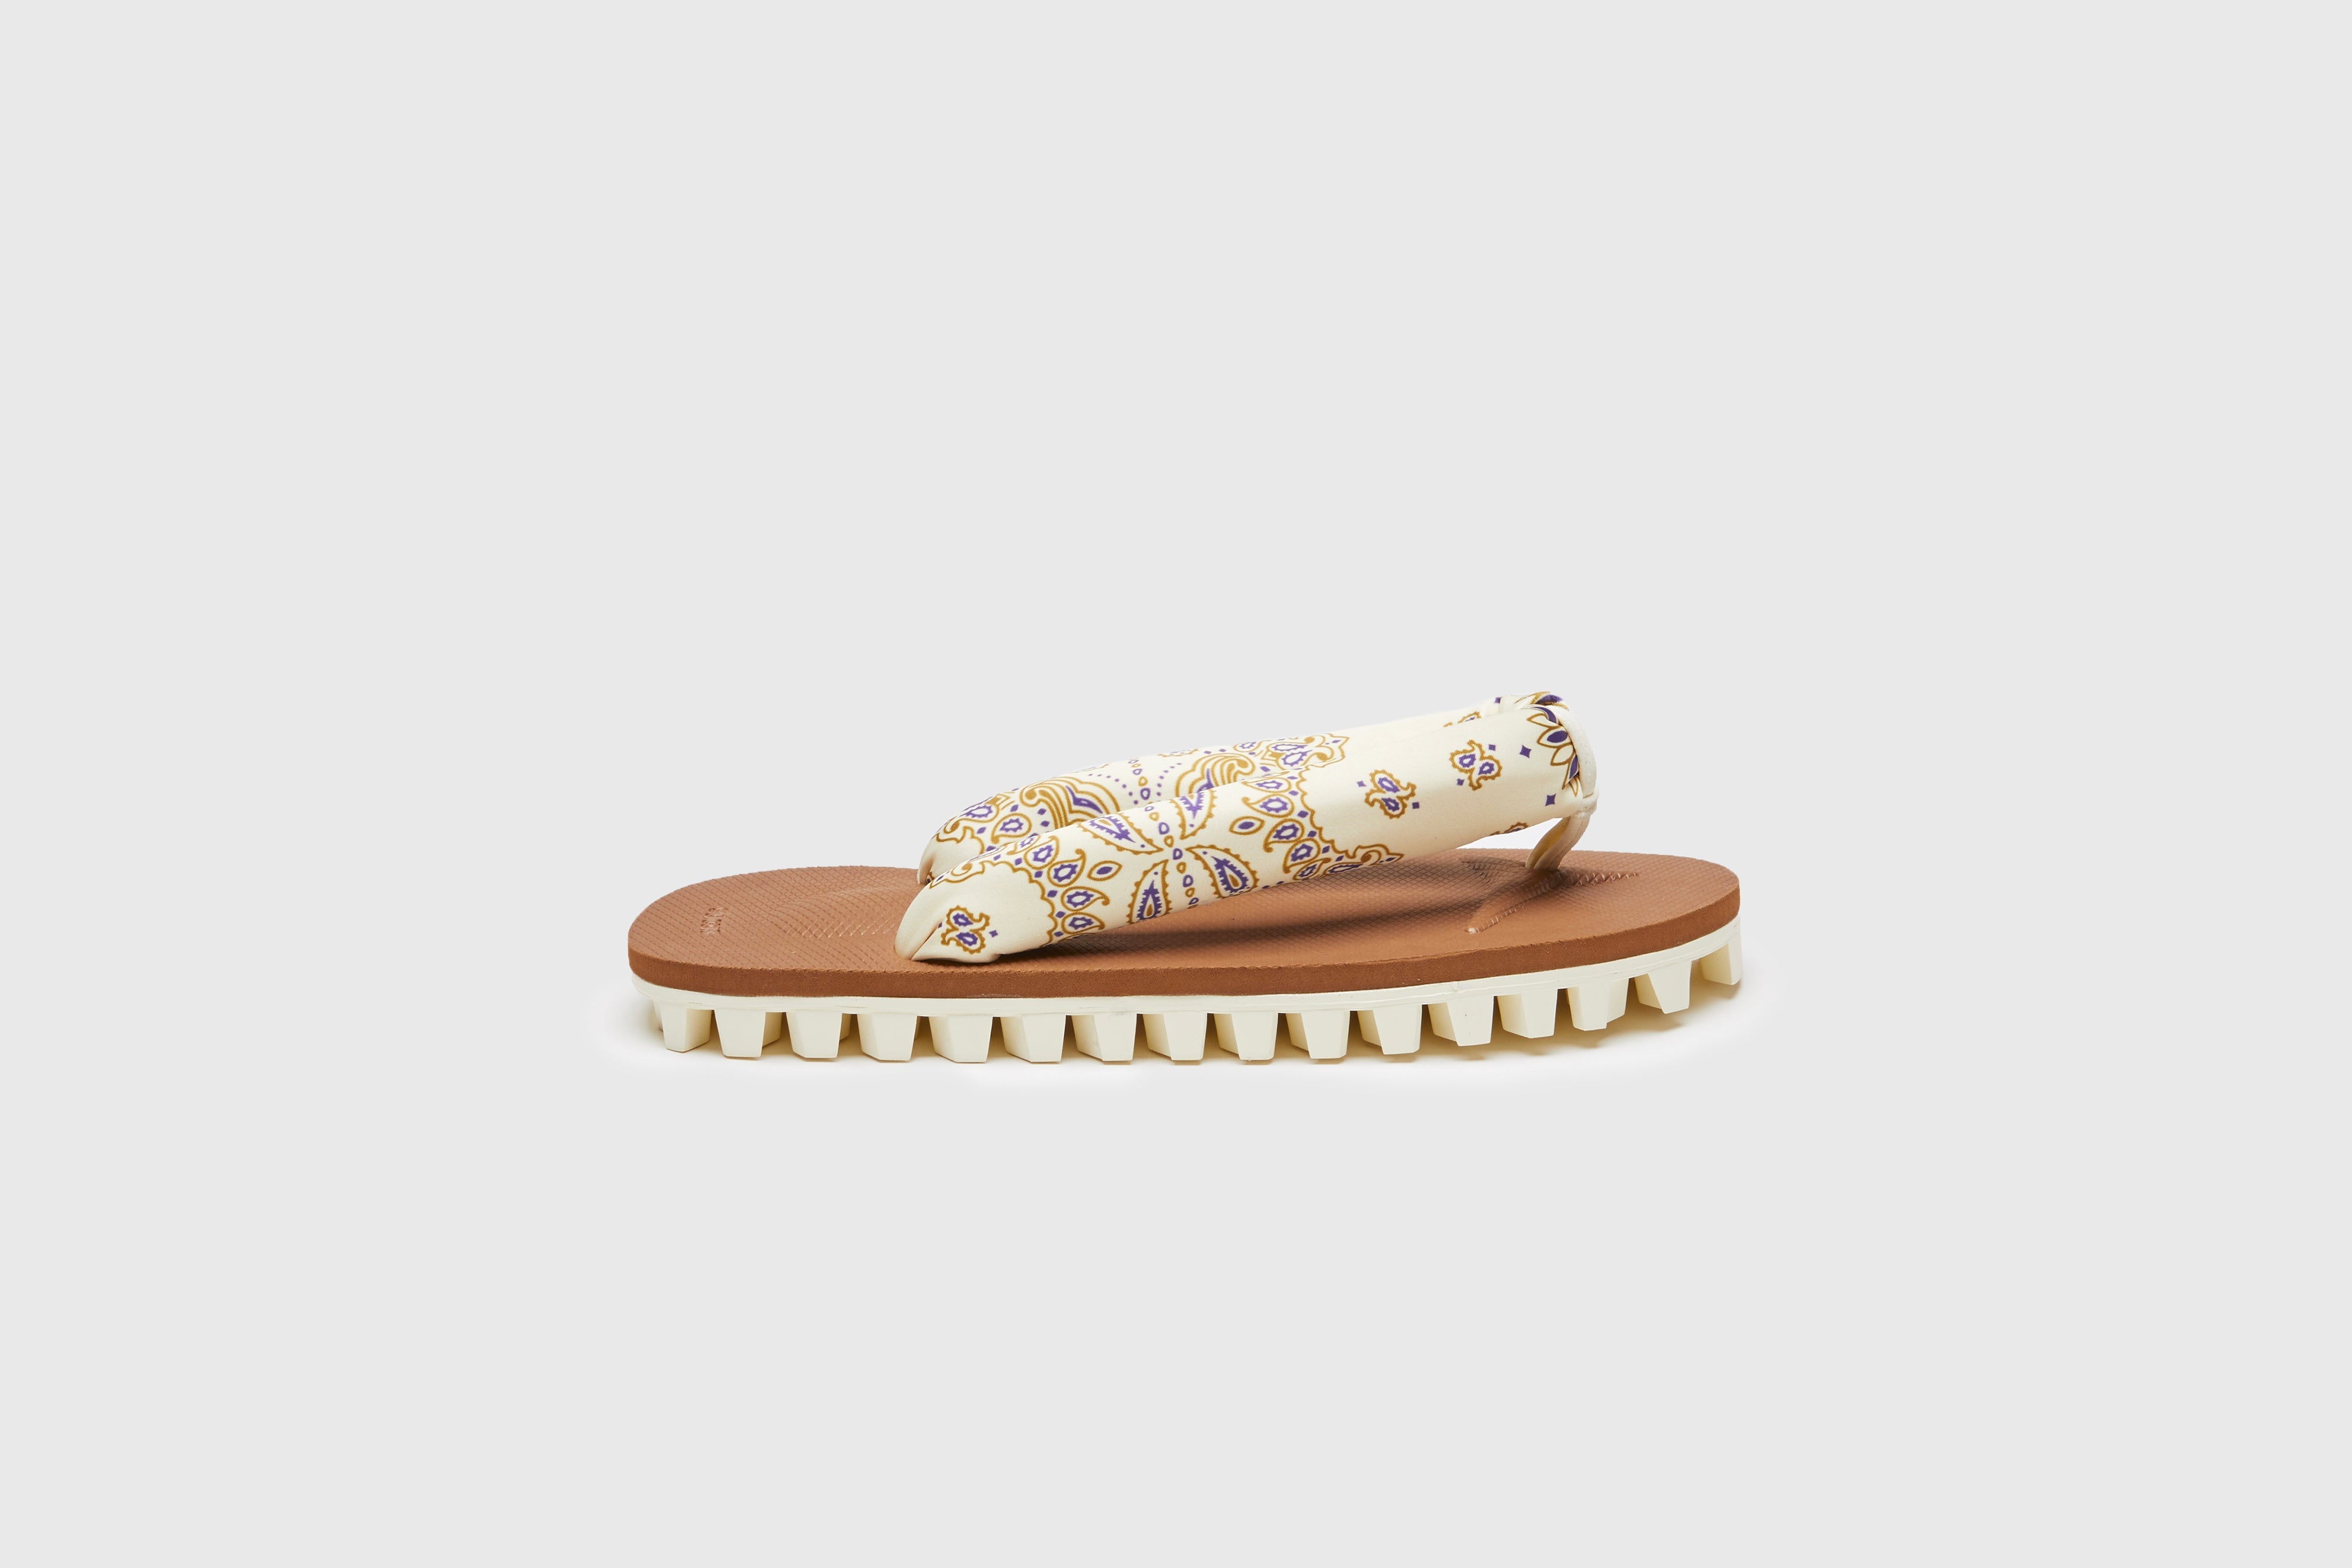 SUICOKE GTA-PT05 sandals with ivory &amp; brown nylon upper, ivory &amp; brown midsole and sole, straps and logo patch. From Spring/Summer 2023 collection on eightywingold Web Store, an official partner of SUICOKE. OG-226-PT05 IVORY X BROWN